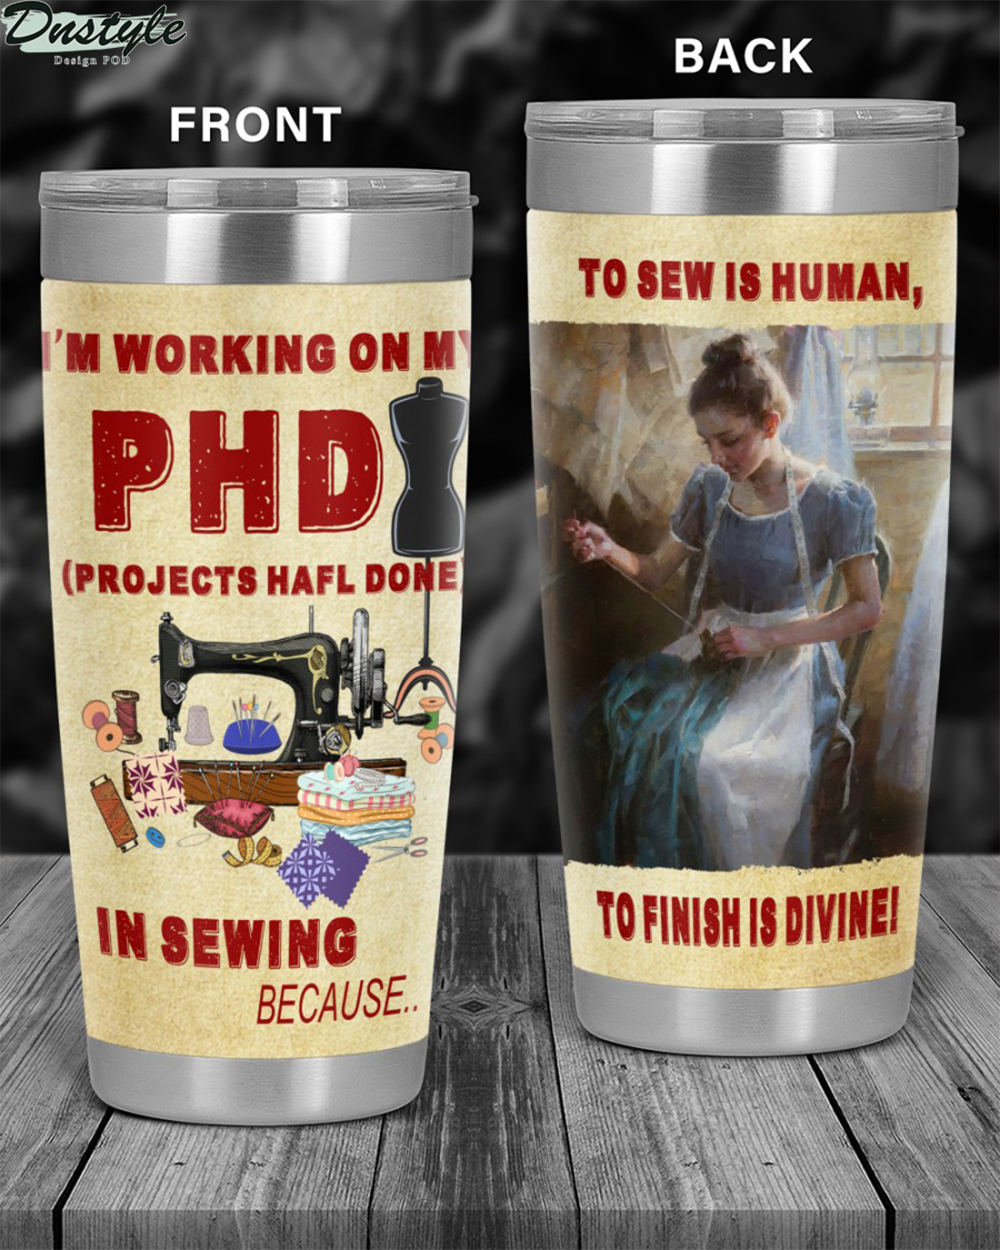 I'm working on my PHD in sewing tumbler 2